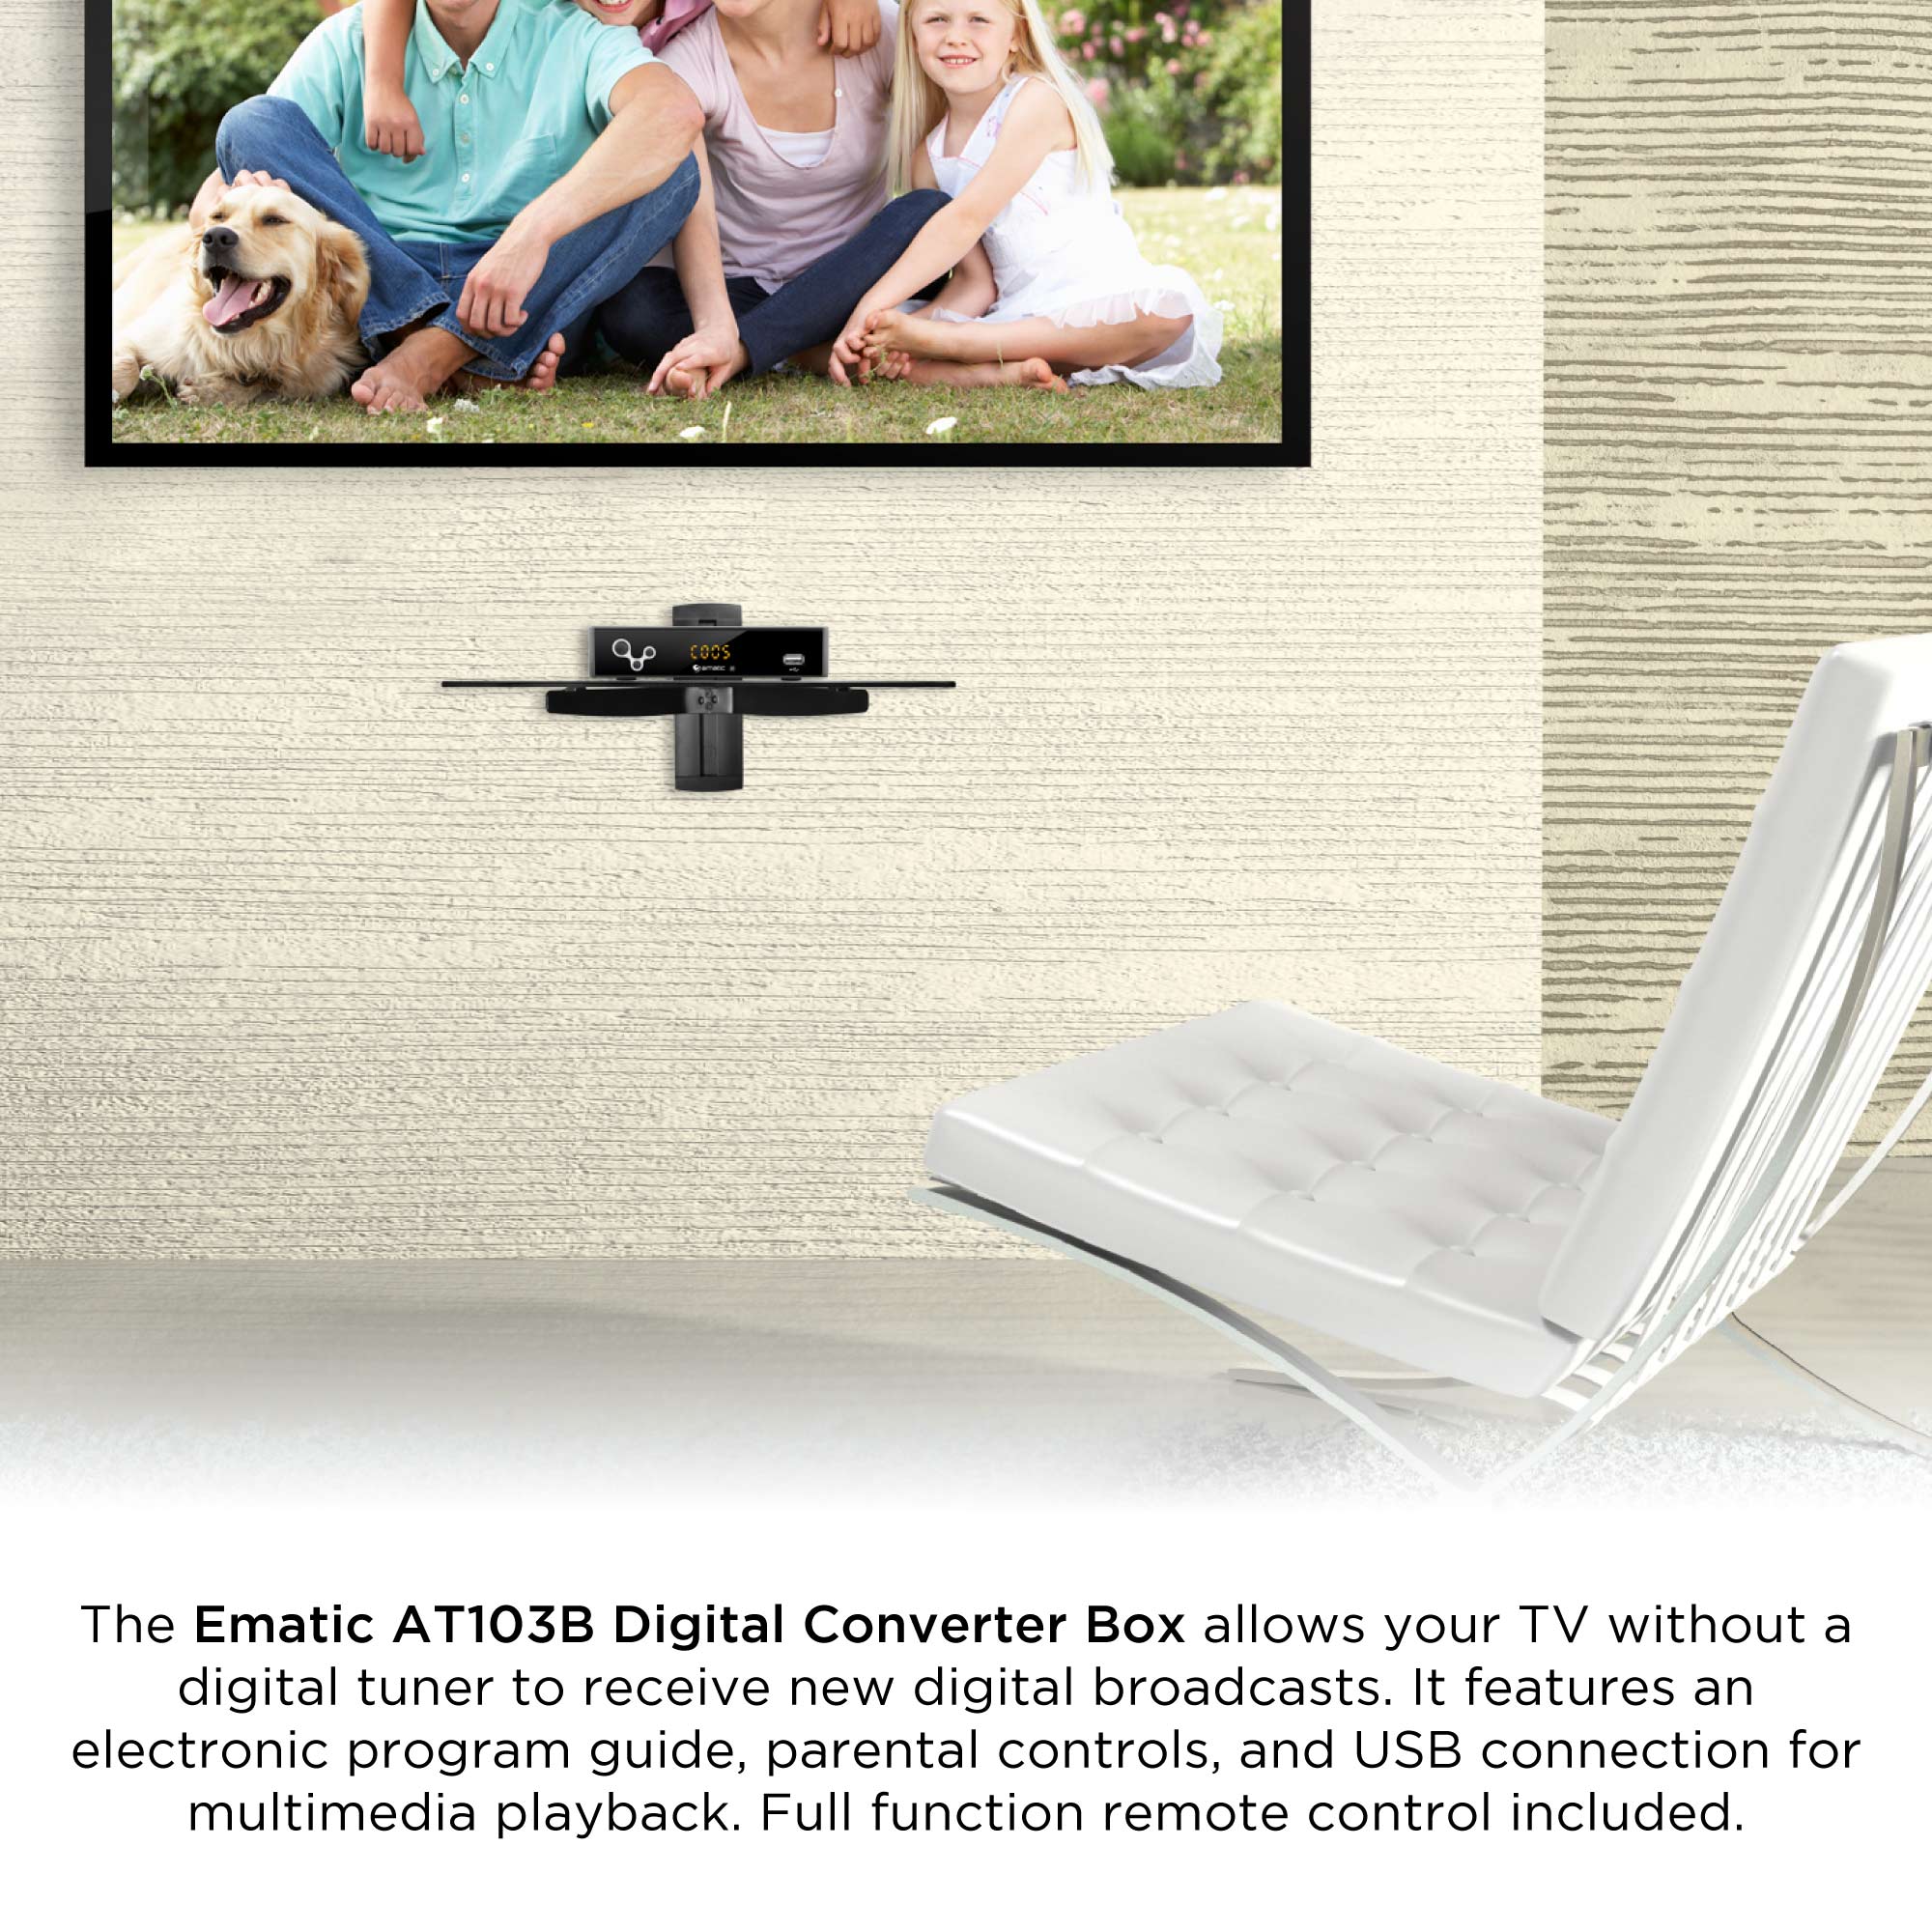 Ematic AT103B Digital Converter Box with LED Display and Recording Capabilities - image 2 of 13